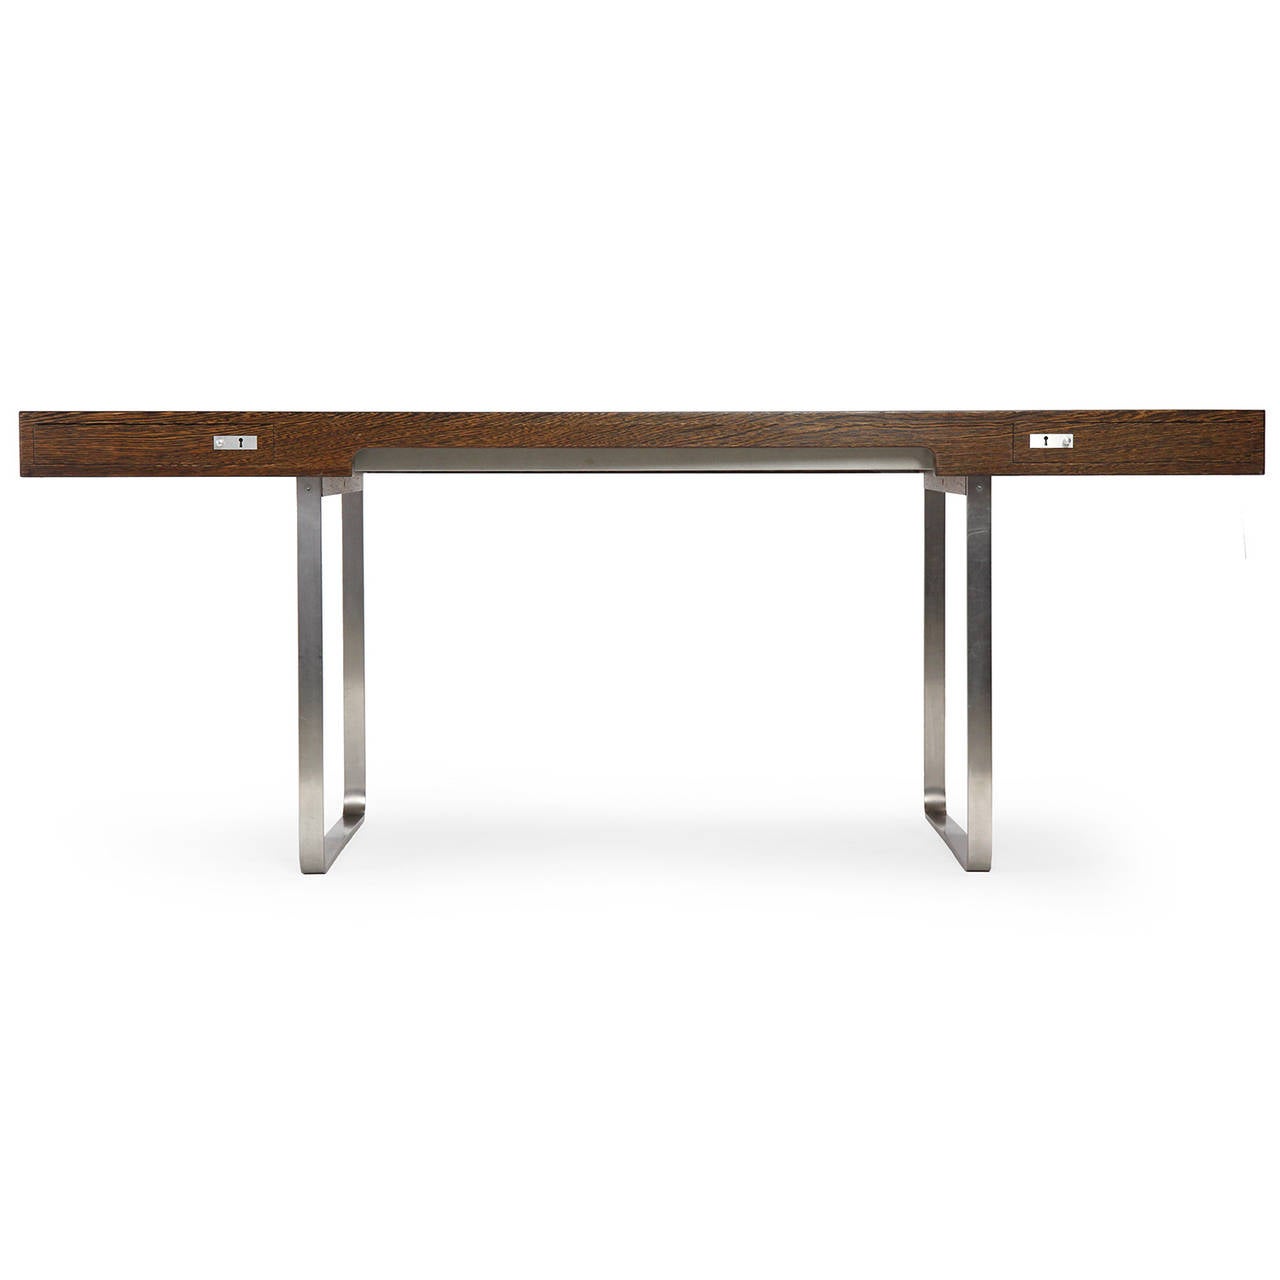 An extremely uncommon and sublimely minimalist desk having a rectilinear top of richly figured wenge with two flush-faced drawers floating above spare continuous banded legs of brushed steel.